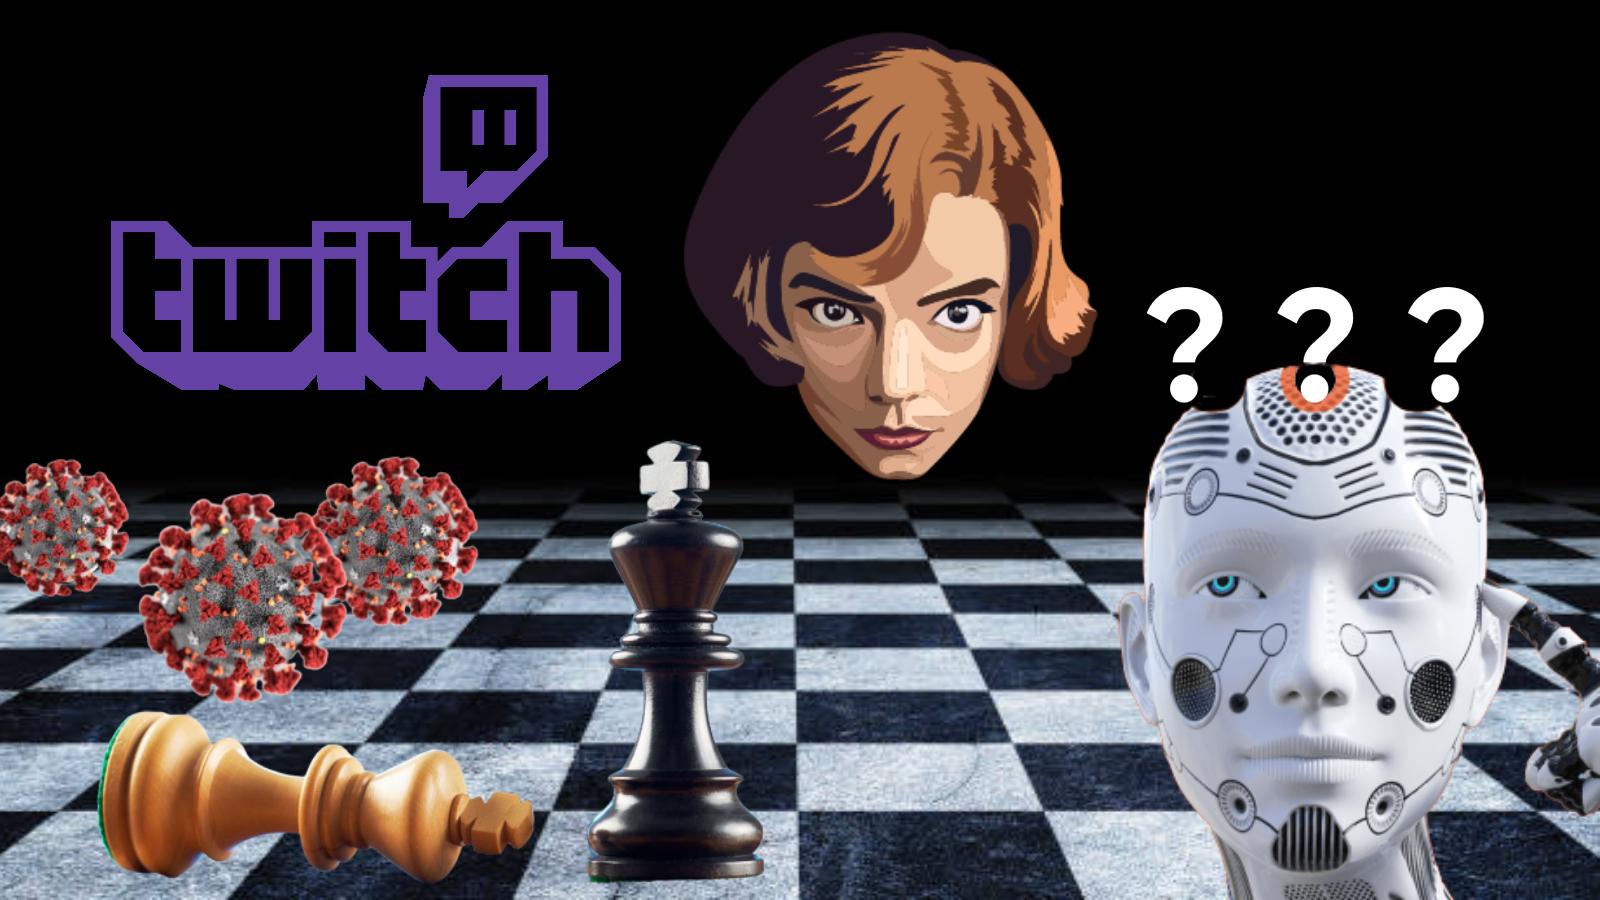 Lichess's Blog • Lichess Game of the Month: October 23 •